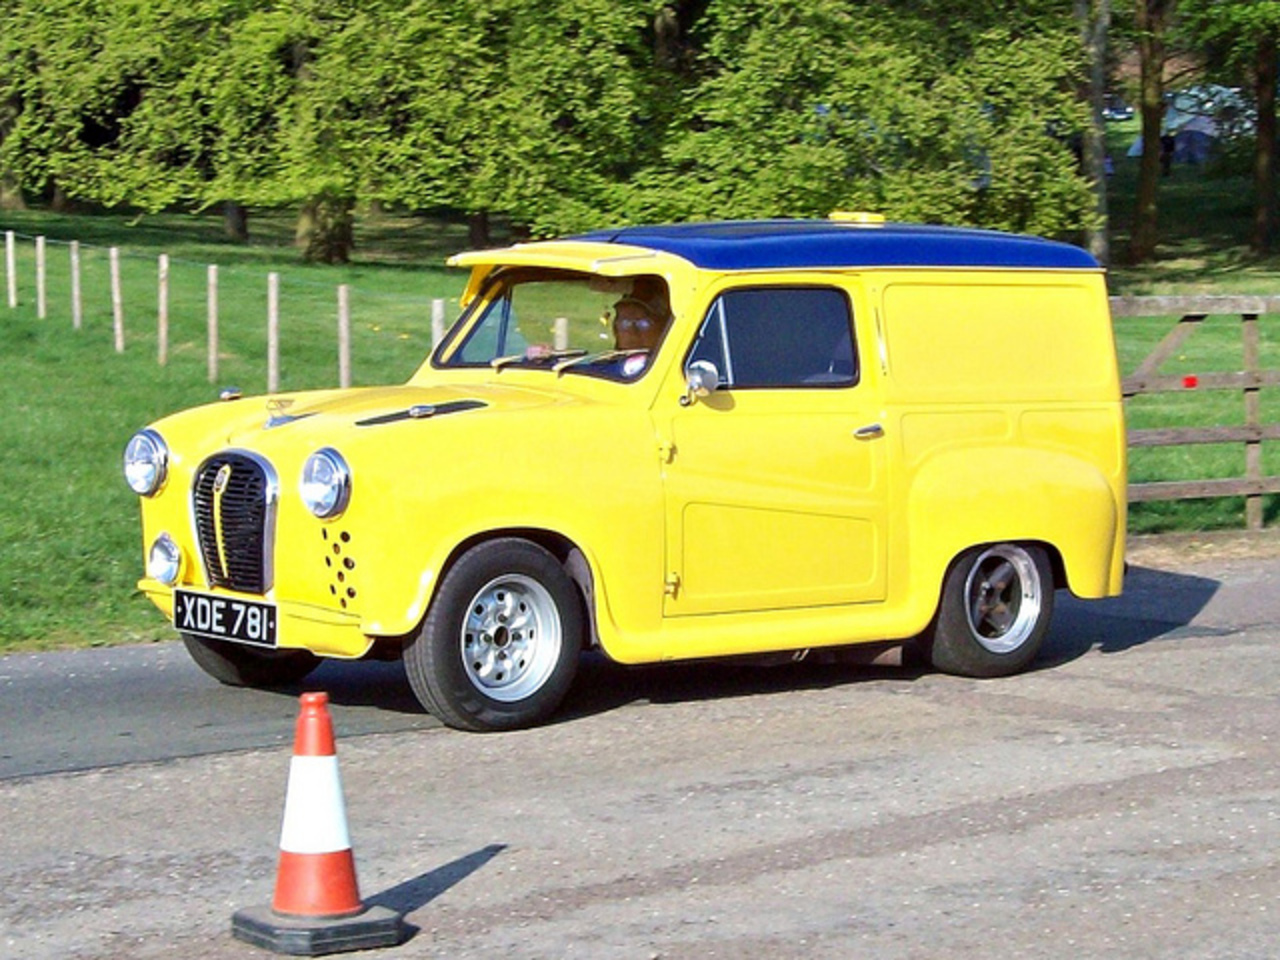 33 Austin A35 Van (1957) (Modified) | Flickr - Photo Sharing!